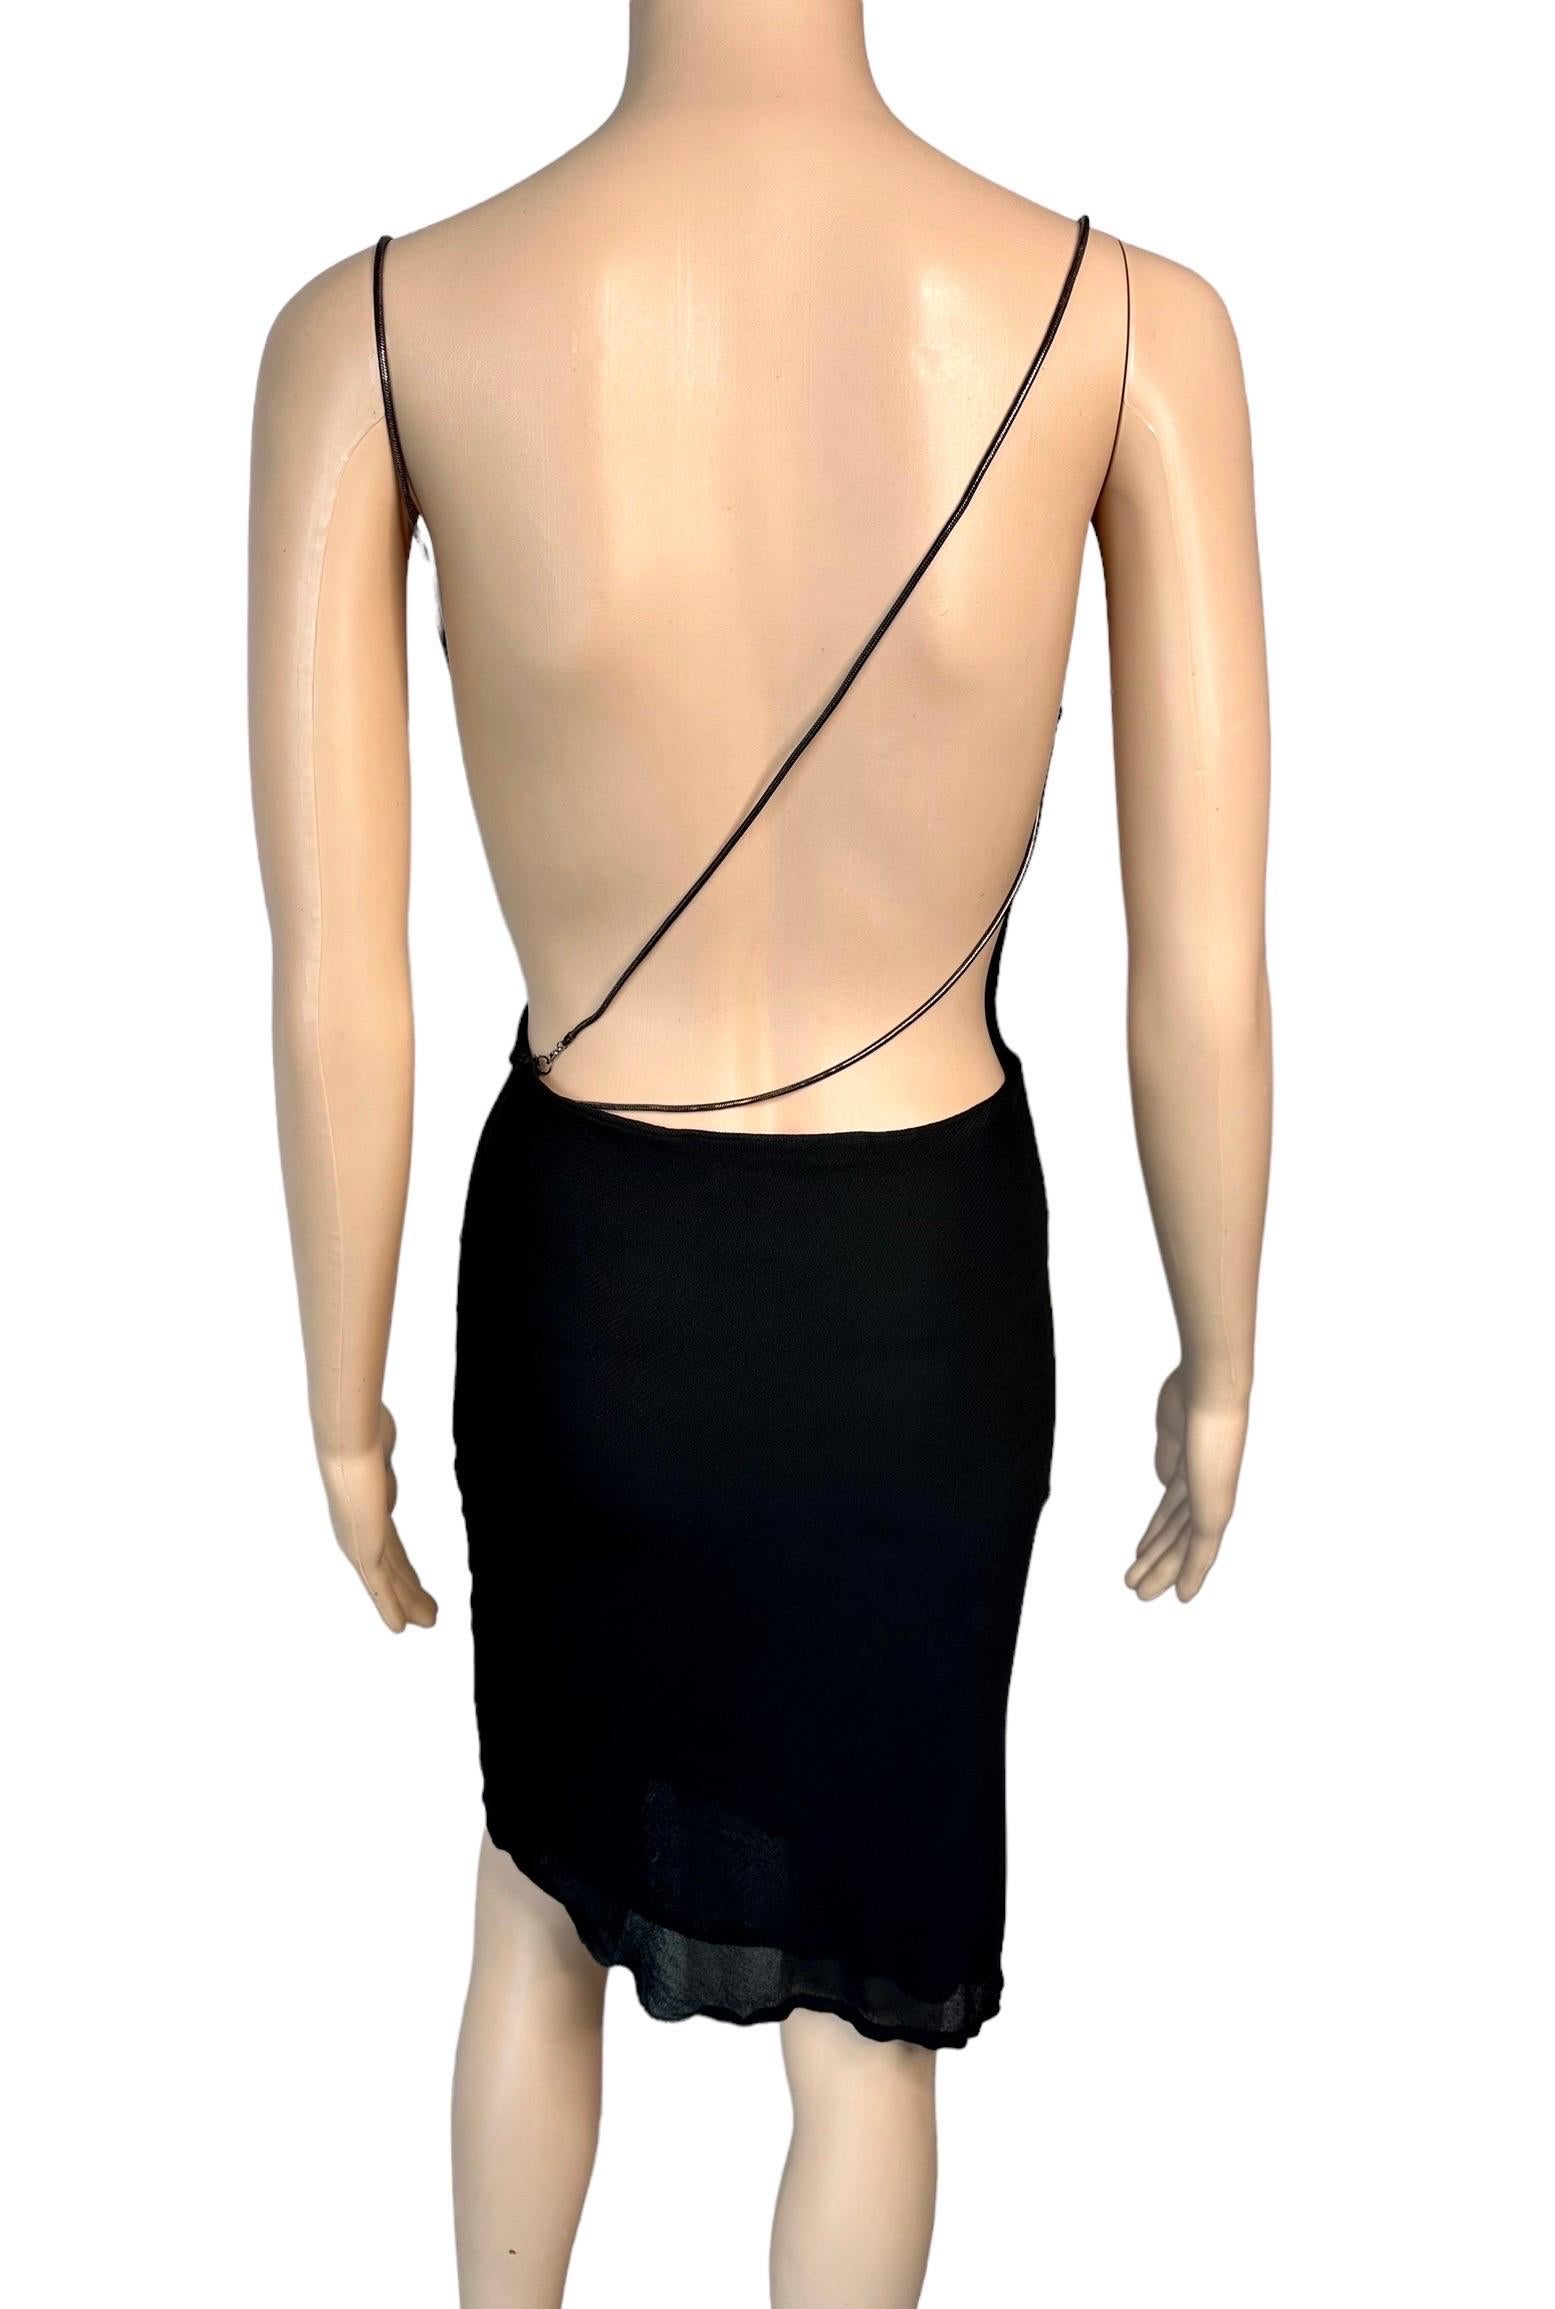 Tom Ford for Gucci S/S 1997 Runway Chain Cutout Backless Sheer Knit Black Dress For Sale 2